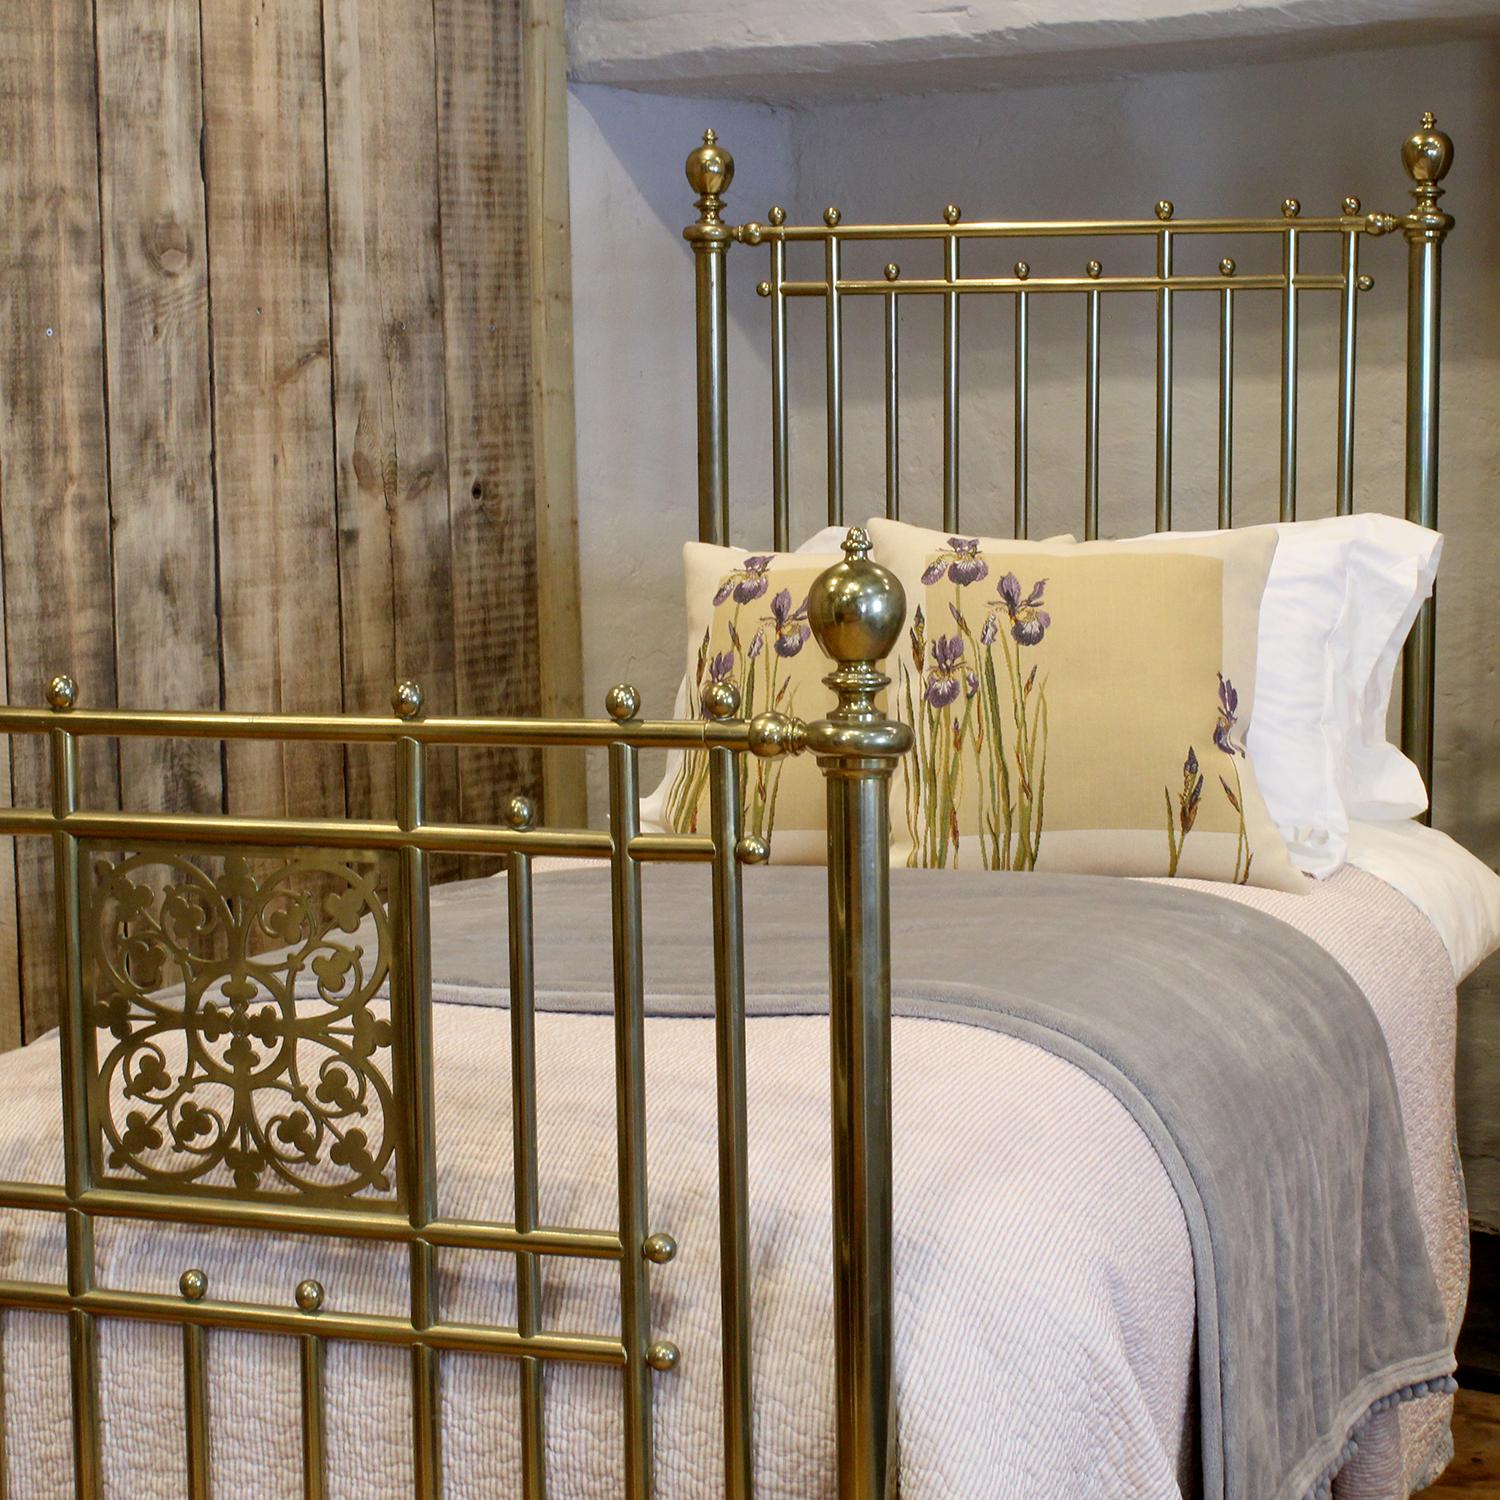 A magnificent top quality all brass Victorian single antique bed manufactured by R. W. Winfield & Co, as shown by a brass plaque on the cross iron of the foot end. These manufacturers from Birmingham fashioned the highest quality brass beds and this